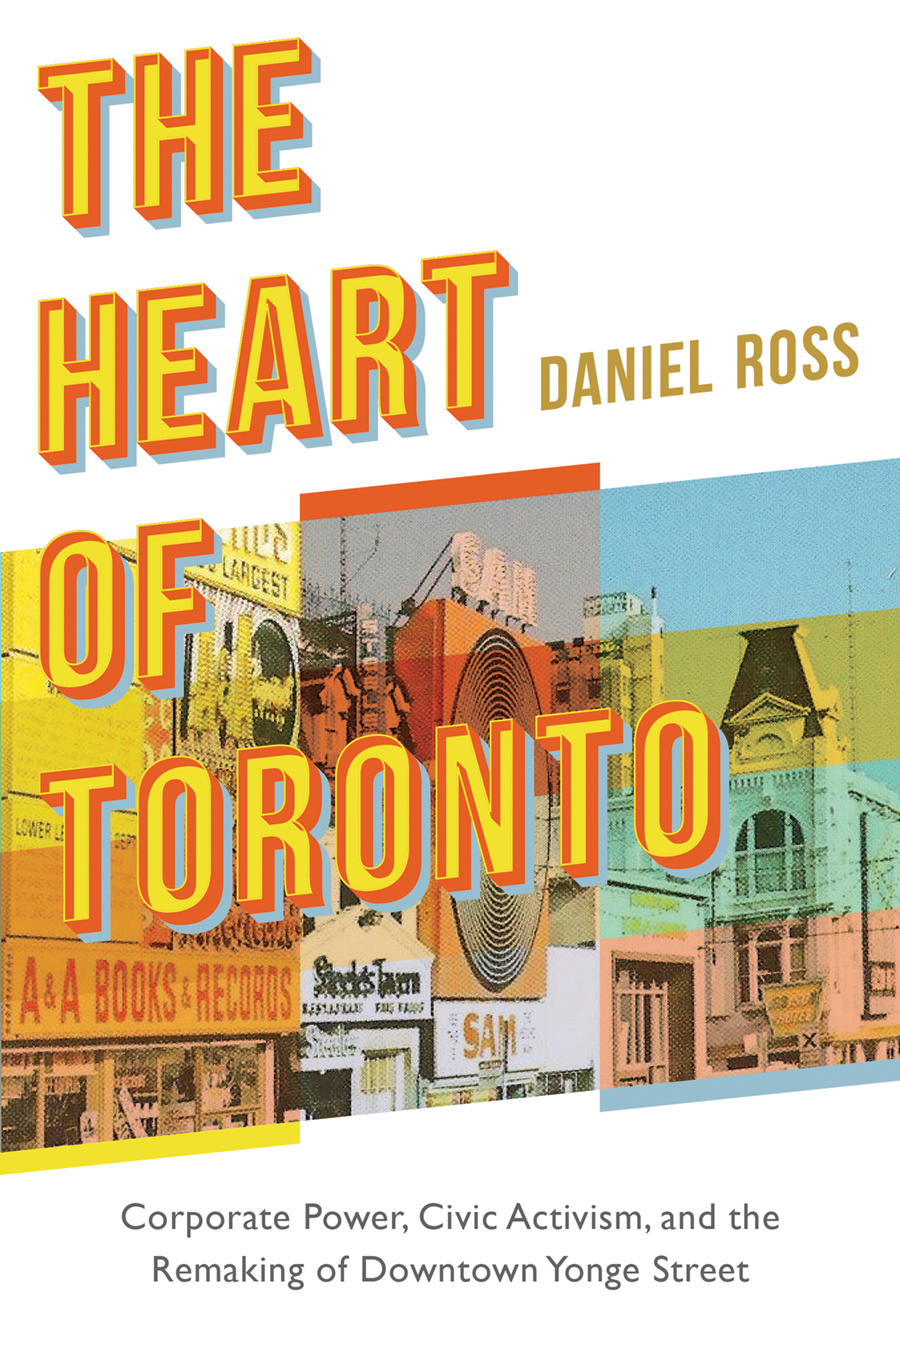 The words "The Heart of Toronto" are written in big yellow and orange letters over a background of an image of storefronts with multicoloured editing. The name "Daniel Ross" is written beside the title, and "Corporate Power, Civic Activism, and the Remaking of Downtown Yonge Street" is written at the bottom.